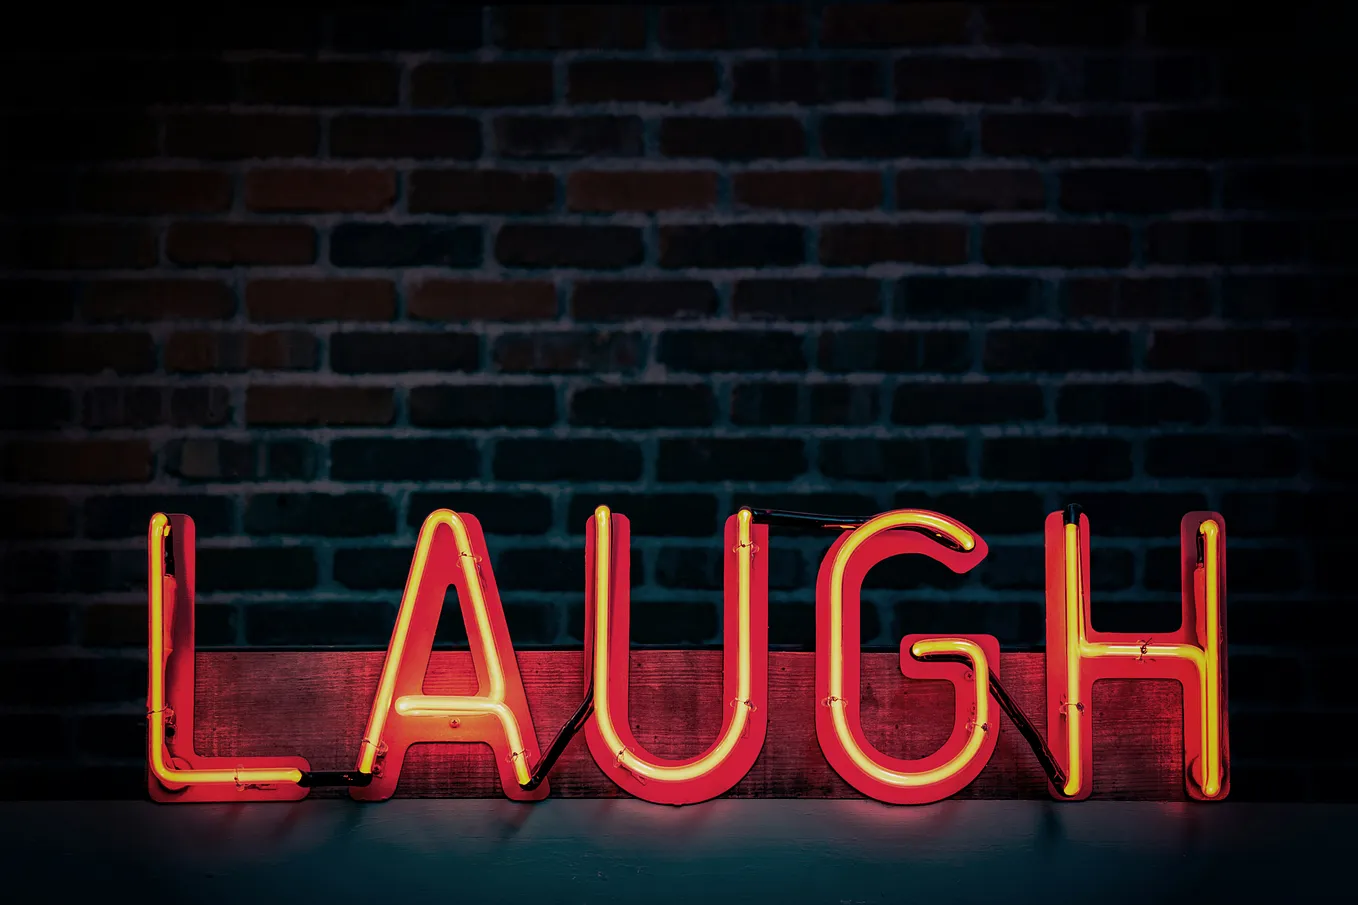 Coloured image in which a neon sign spells out the word ‘laugh’ in bright letters against a dark brick wall.